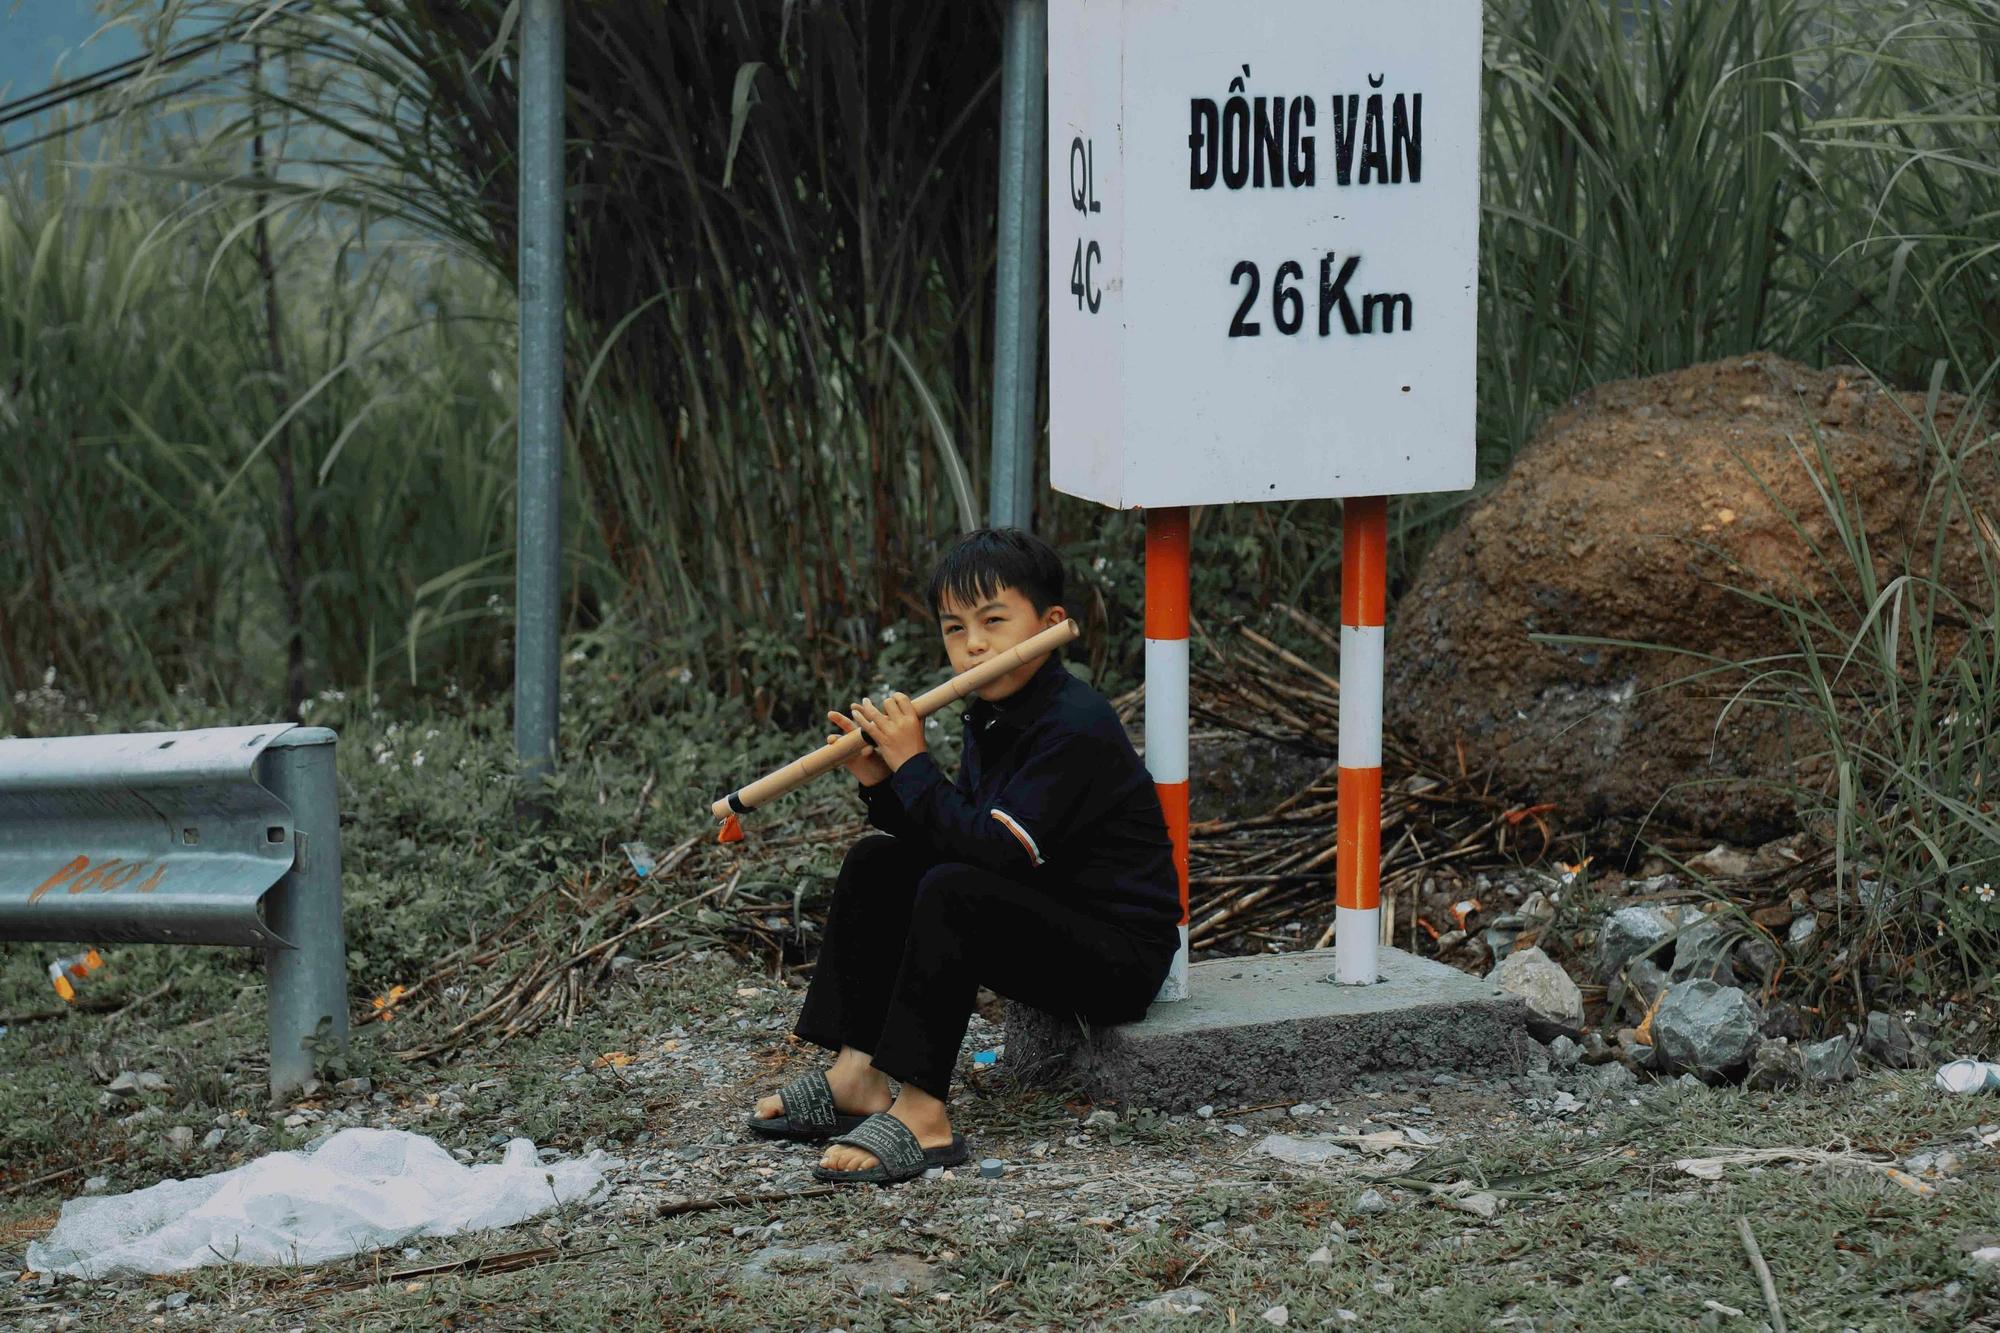 This little boy had practiced playing flute every day for nearly 3 years - right at this corner